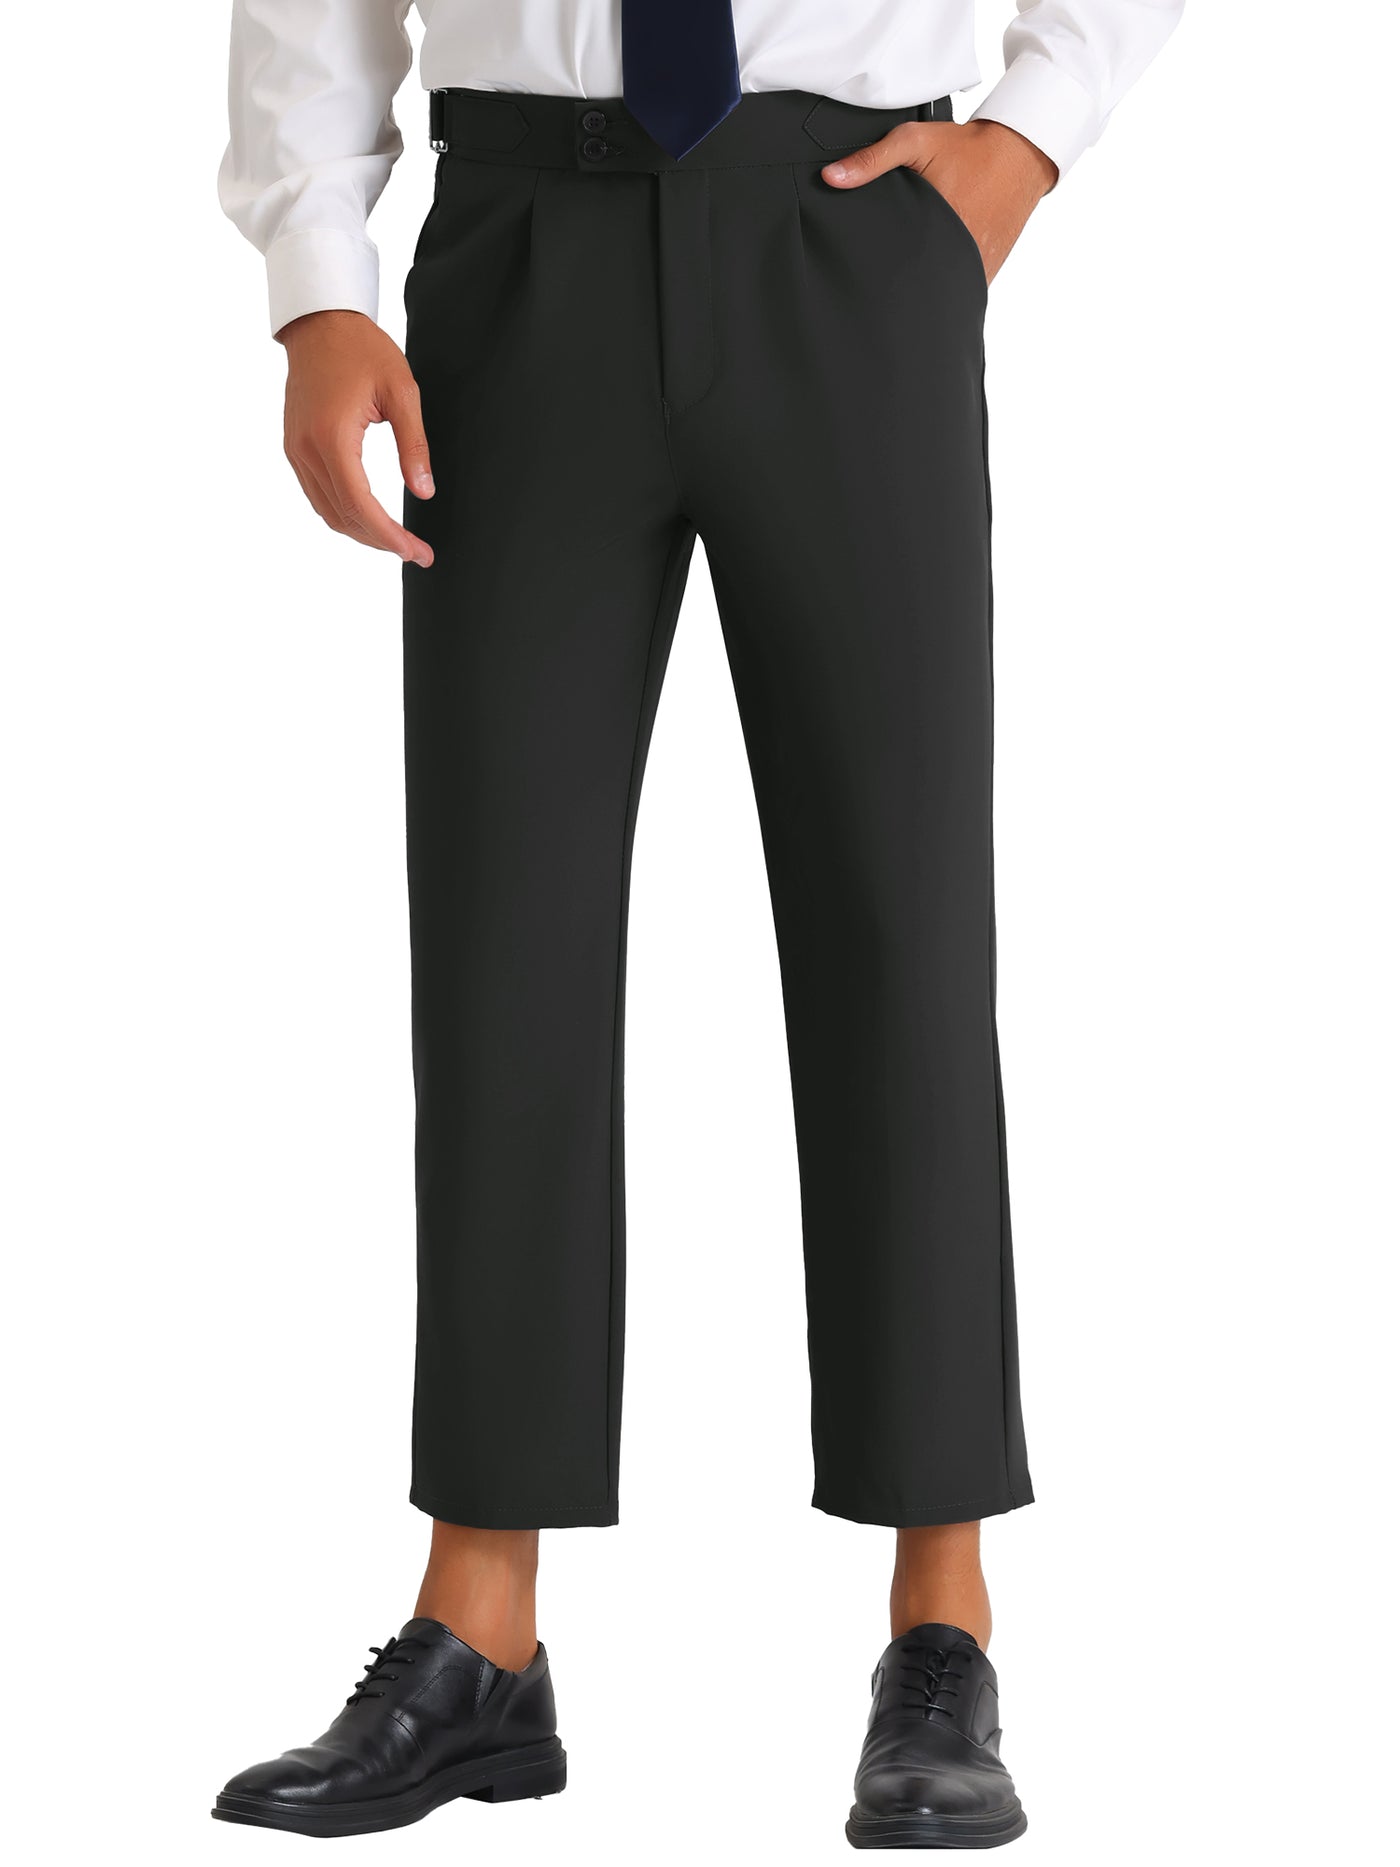 Bublédon Men's Lightweight Two Buttons Pleated Front Work Office Pants